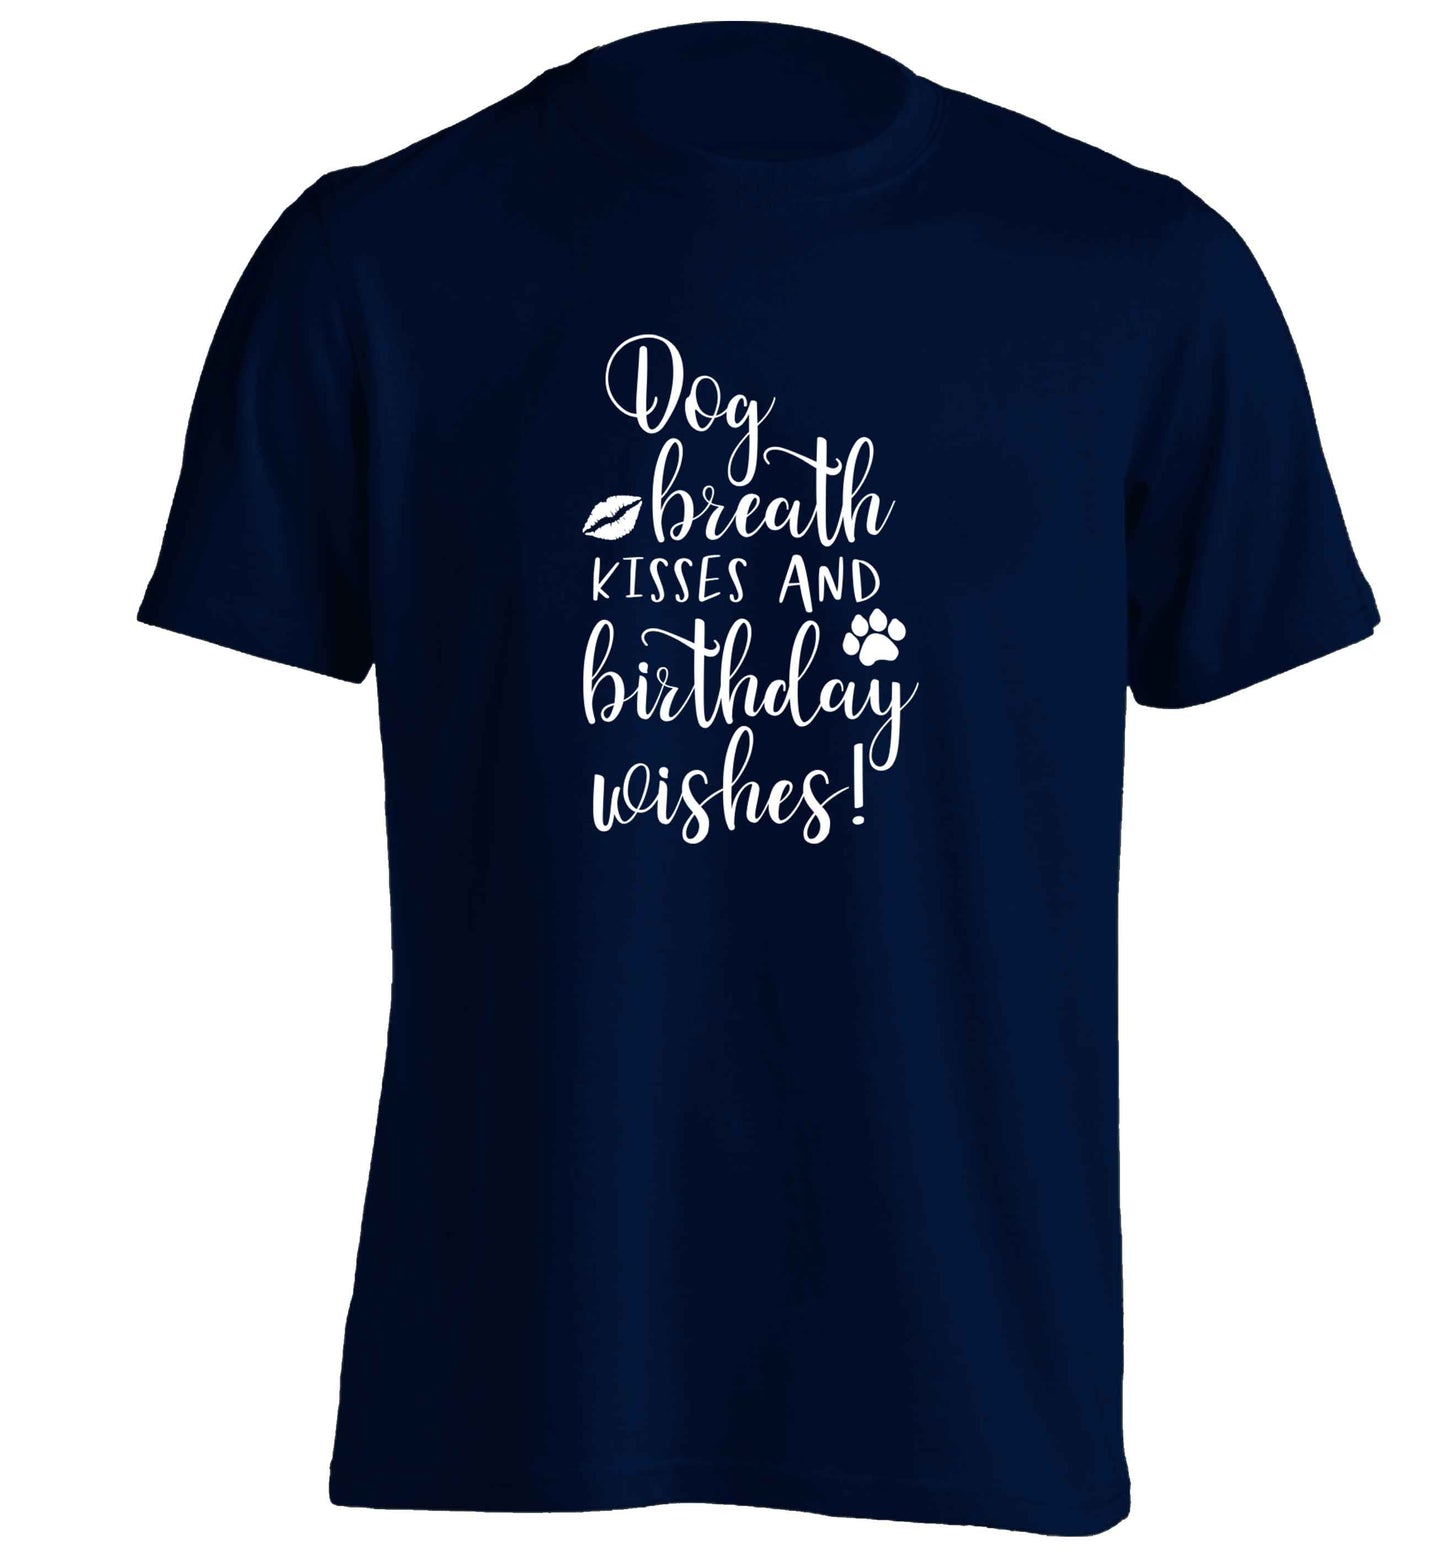 Dog breath kisses and christmas wishes adults unisex navy Tshirt 2XL